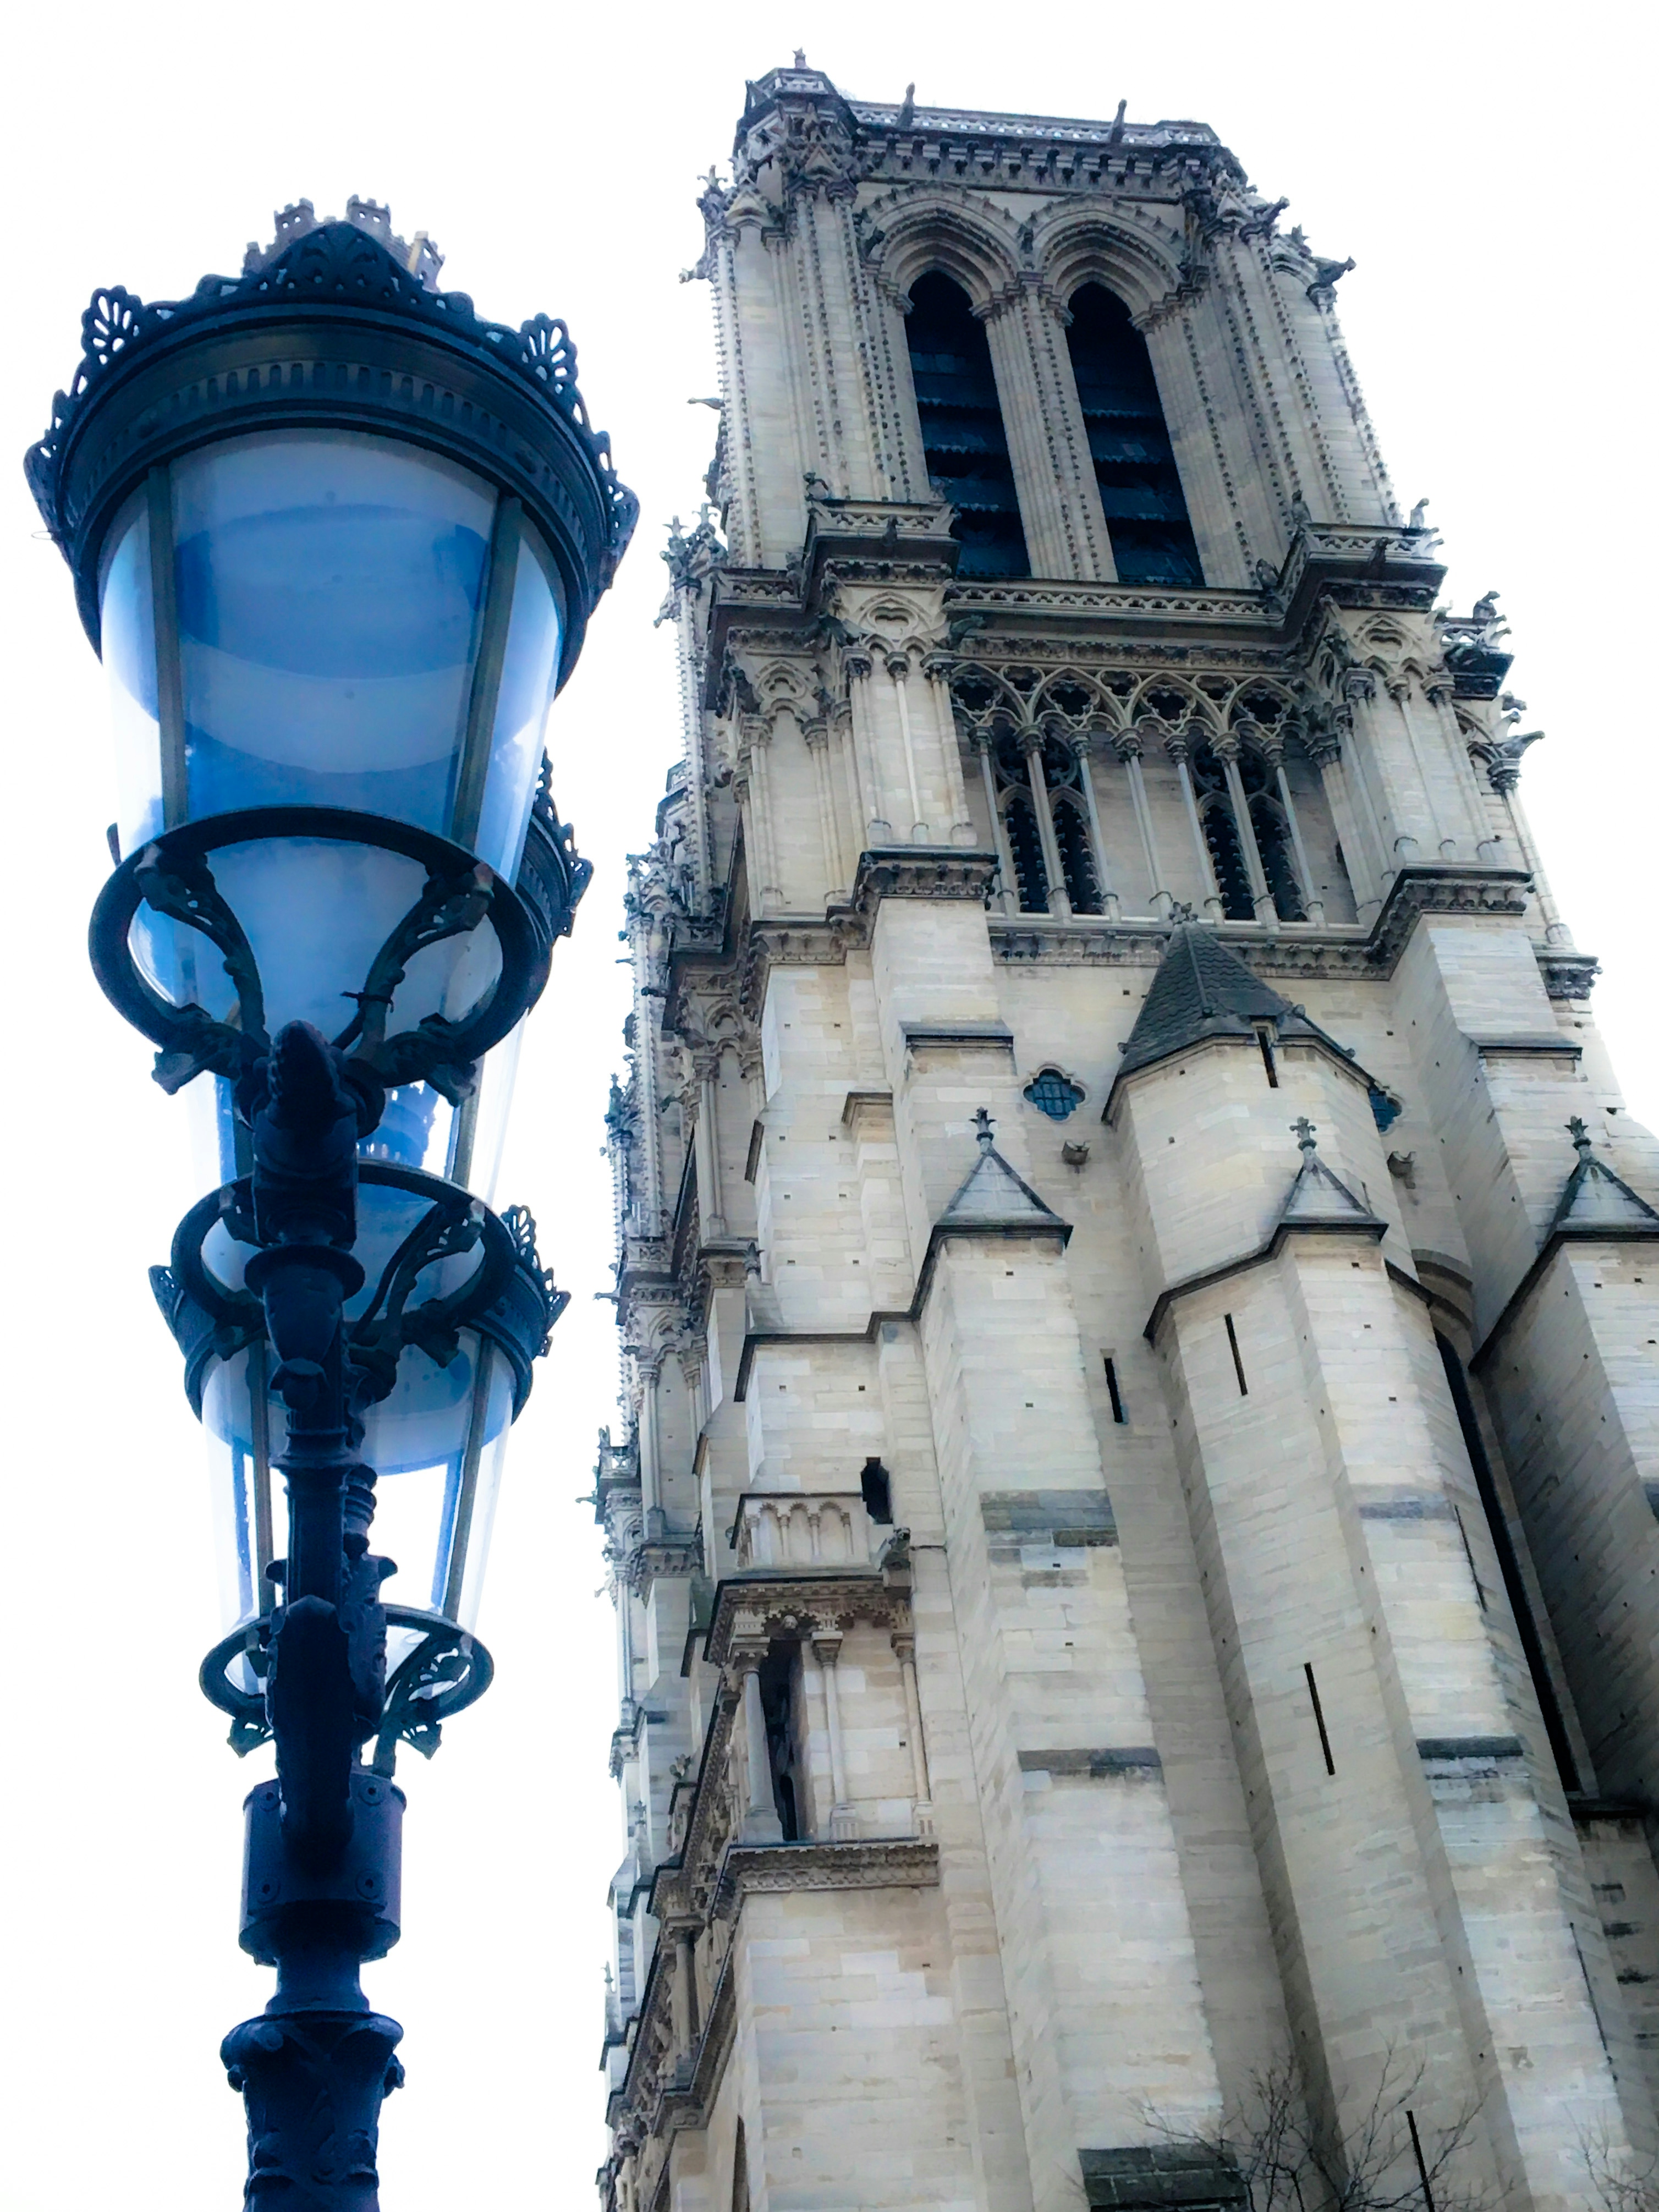 Notre Dame & sreetlamp cast in blue by bright sky, photographed by Jeff Kraft